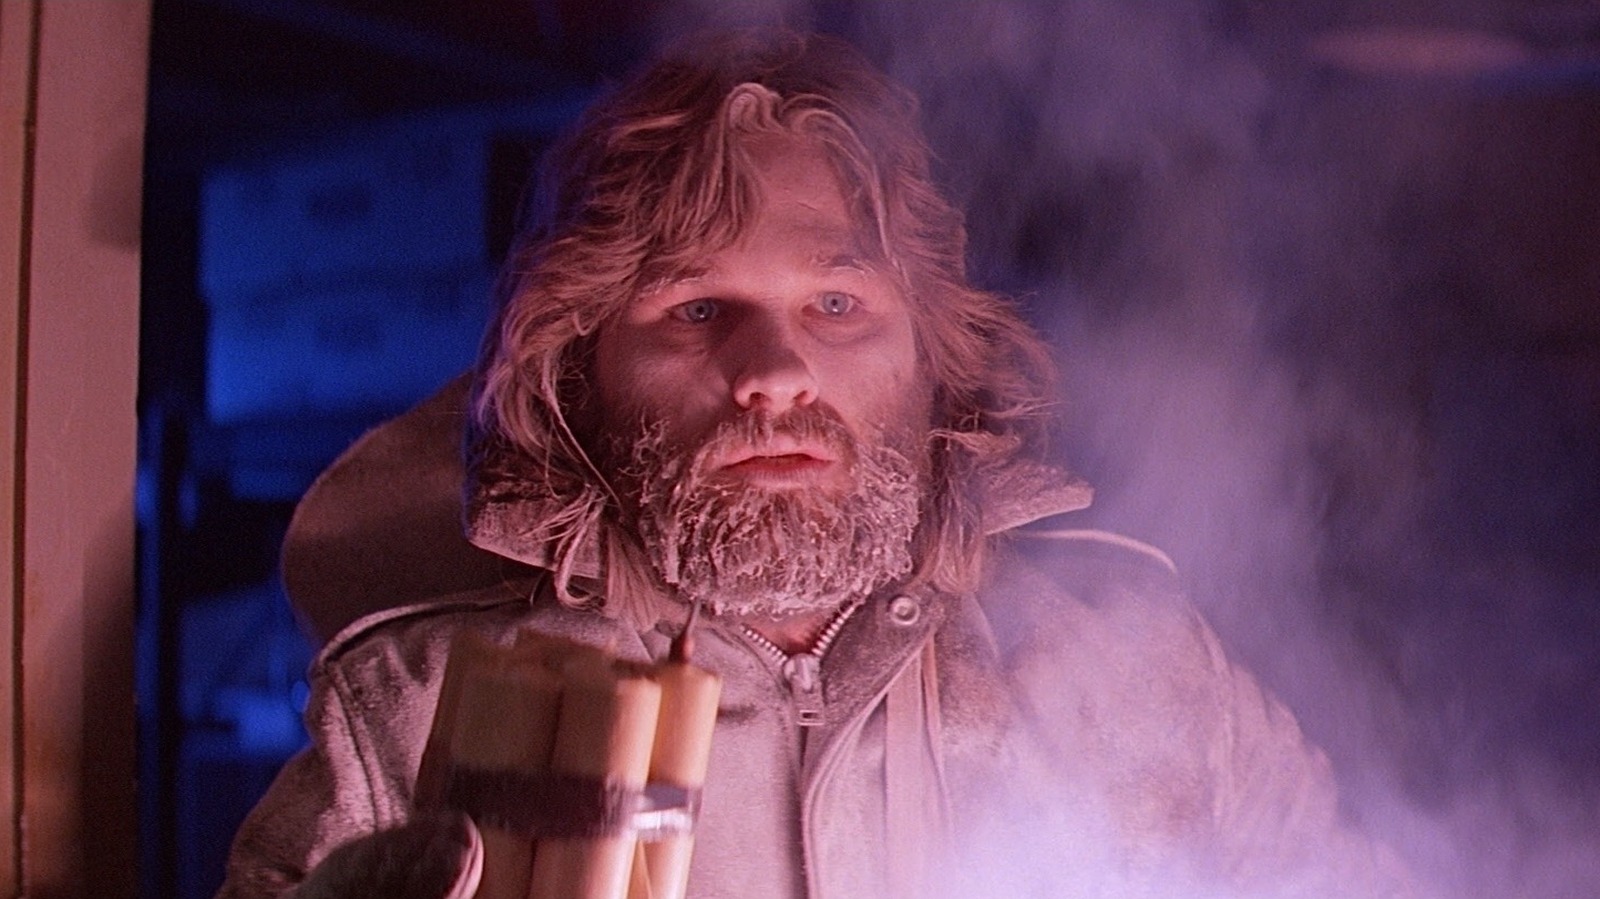 Fathom Events Bringing Carpenter's 'The Thing' Back to Theaters for 40th  Anniversary in June! - Bloody Disgusting